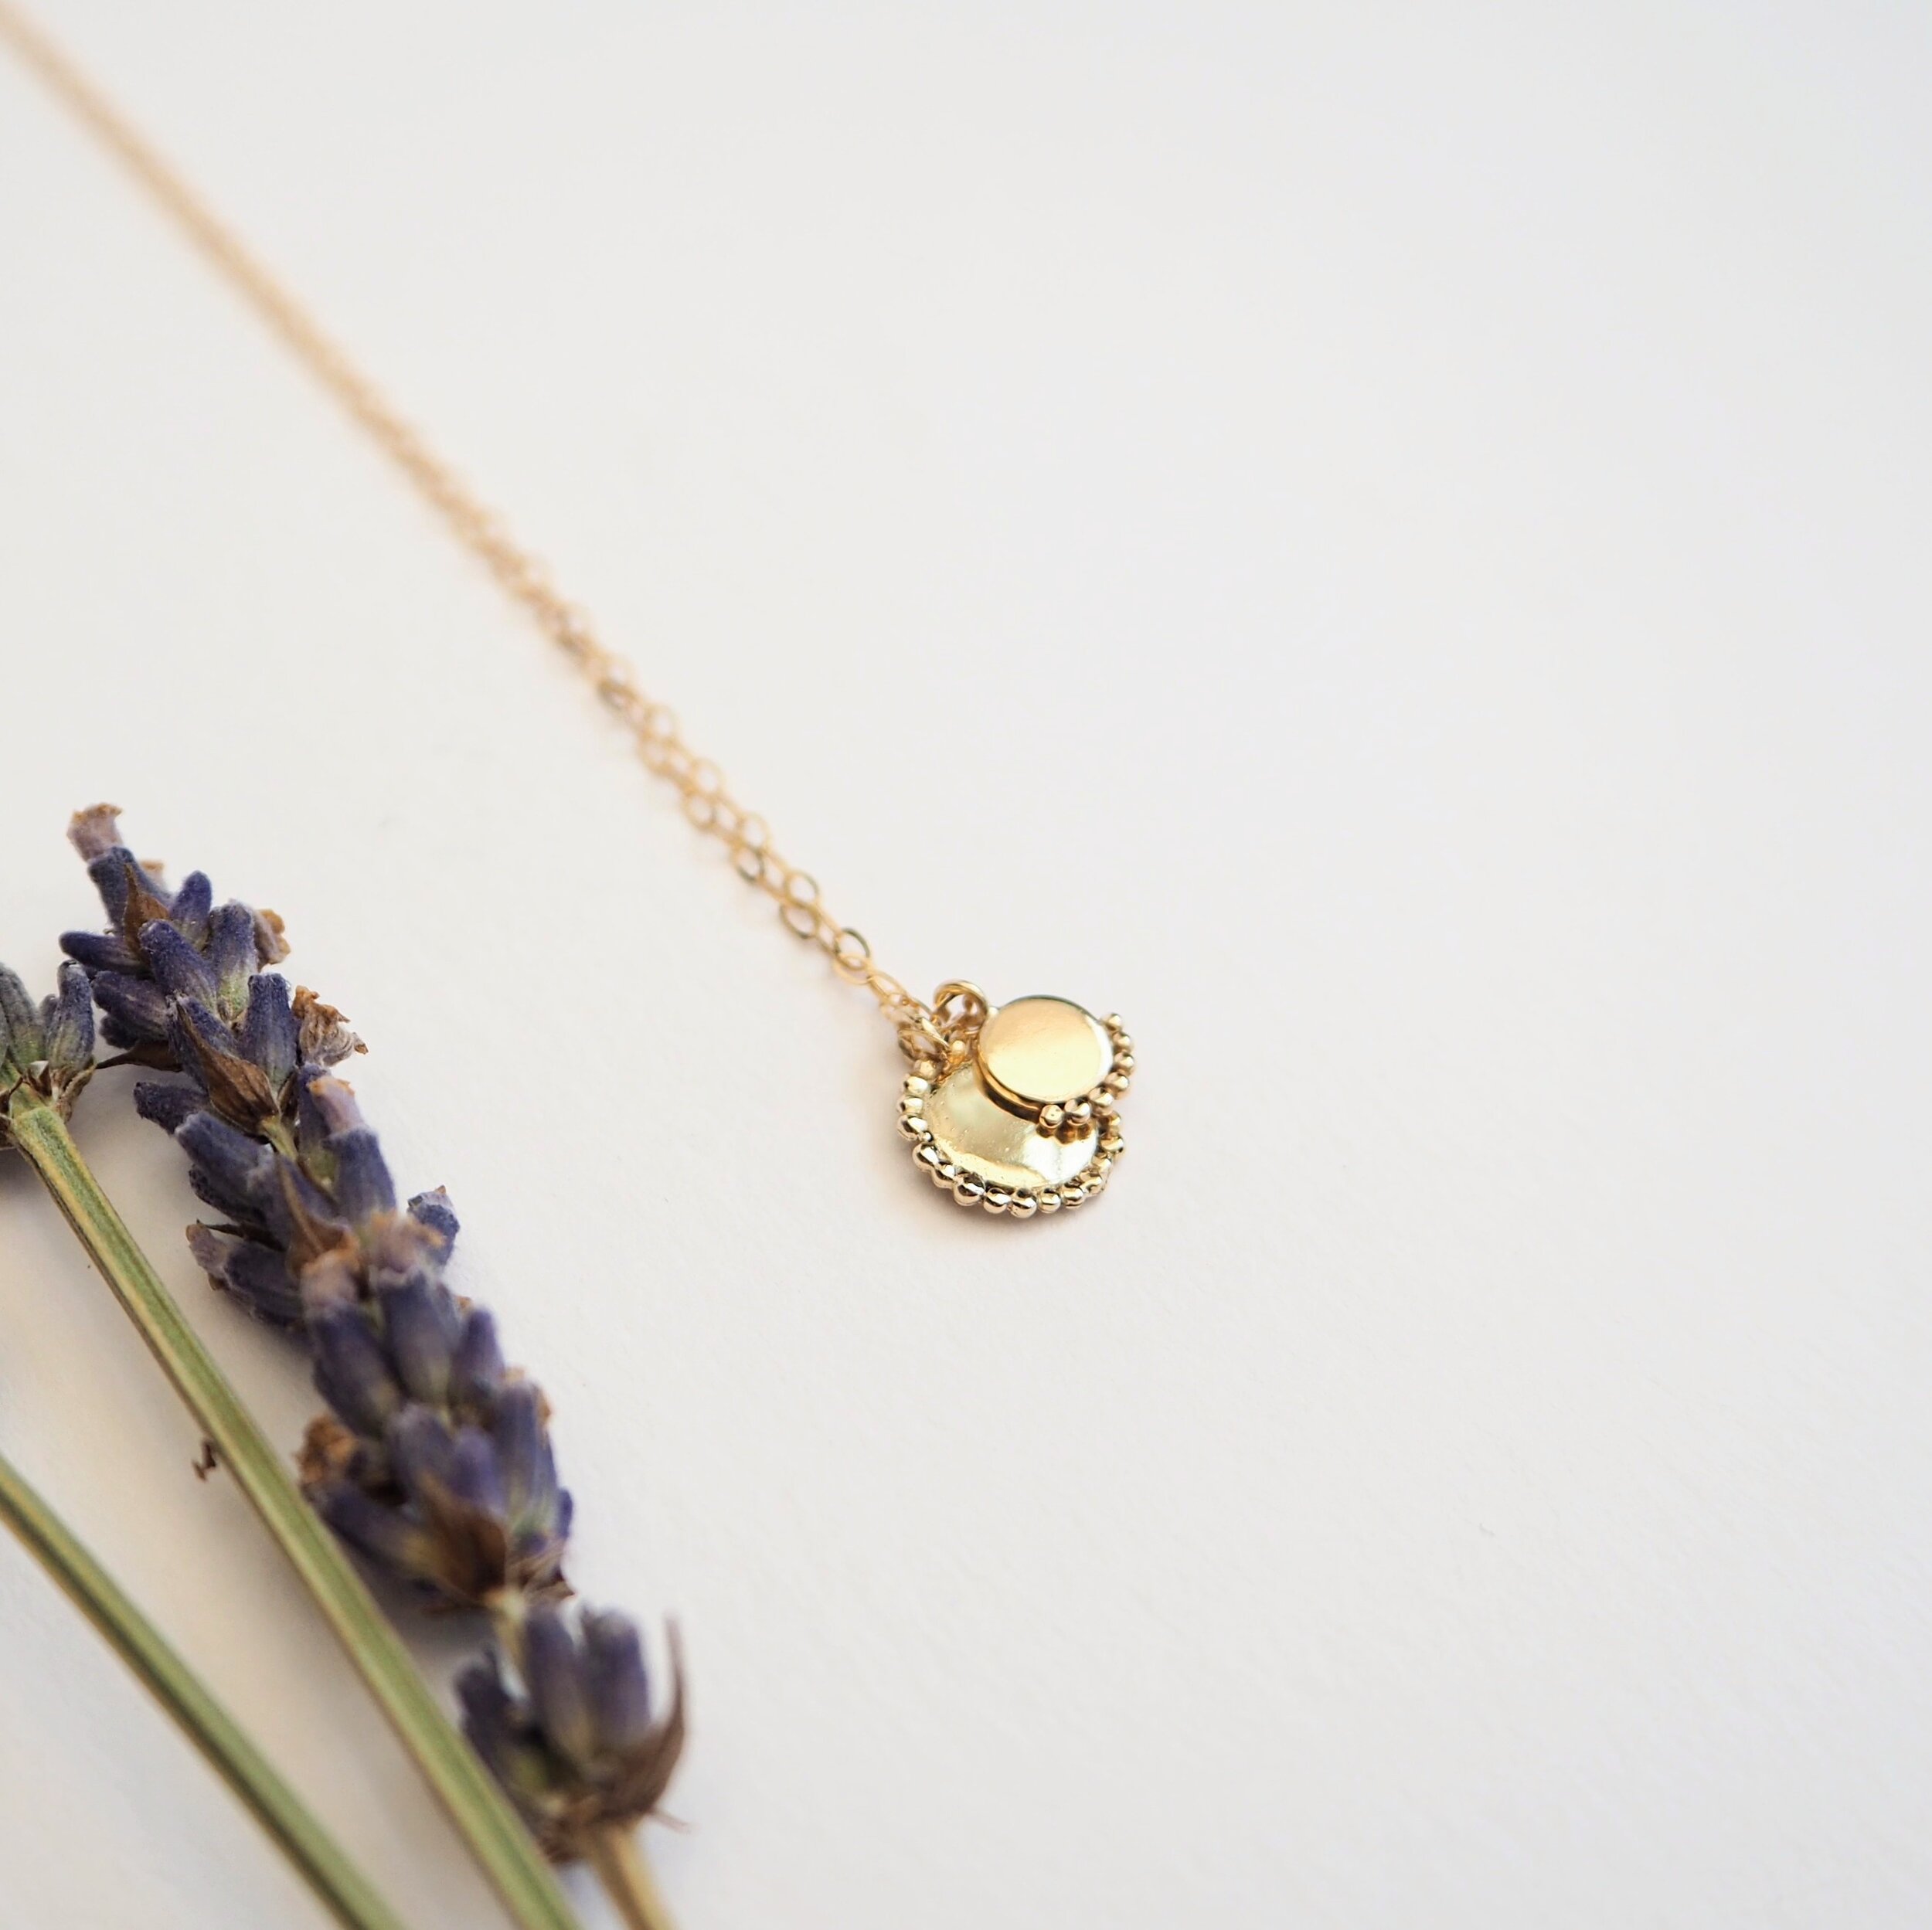 Recycled 9ct gold Sol Personalised Initial Charm Necklace